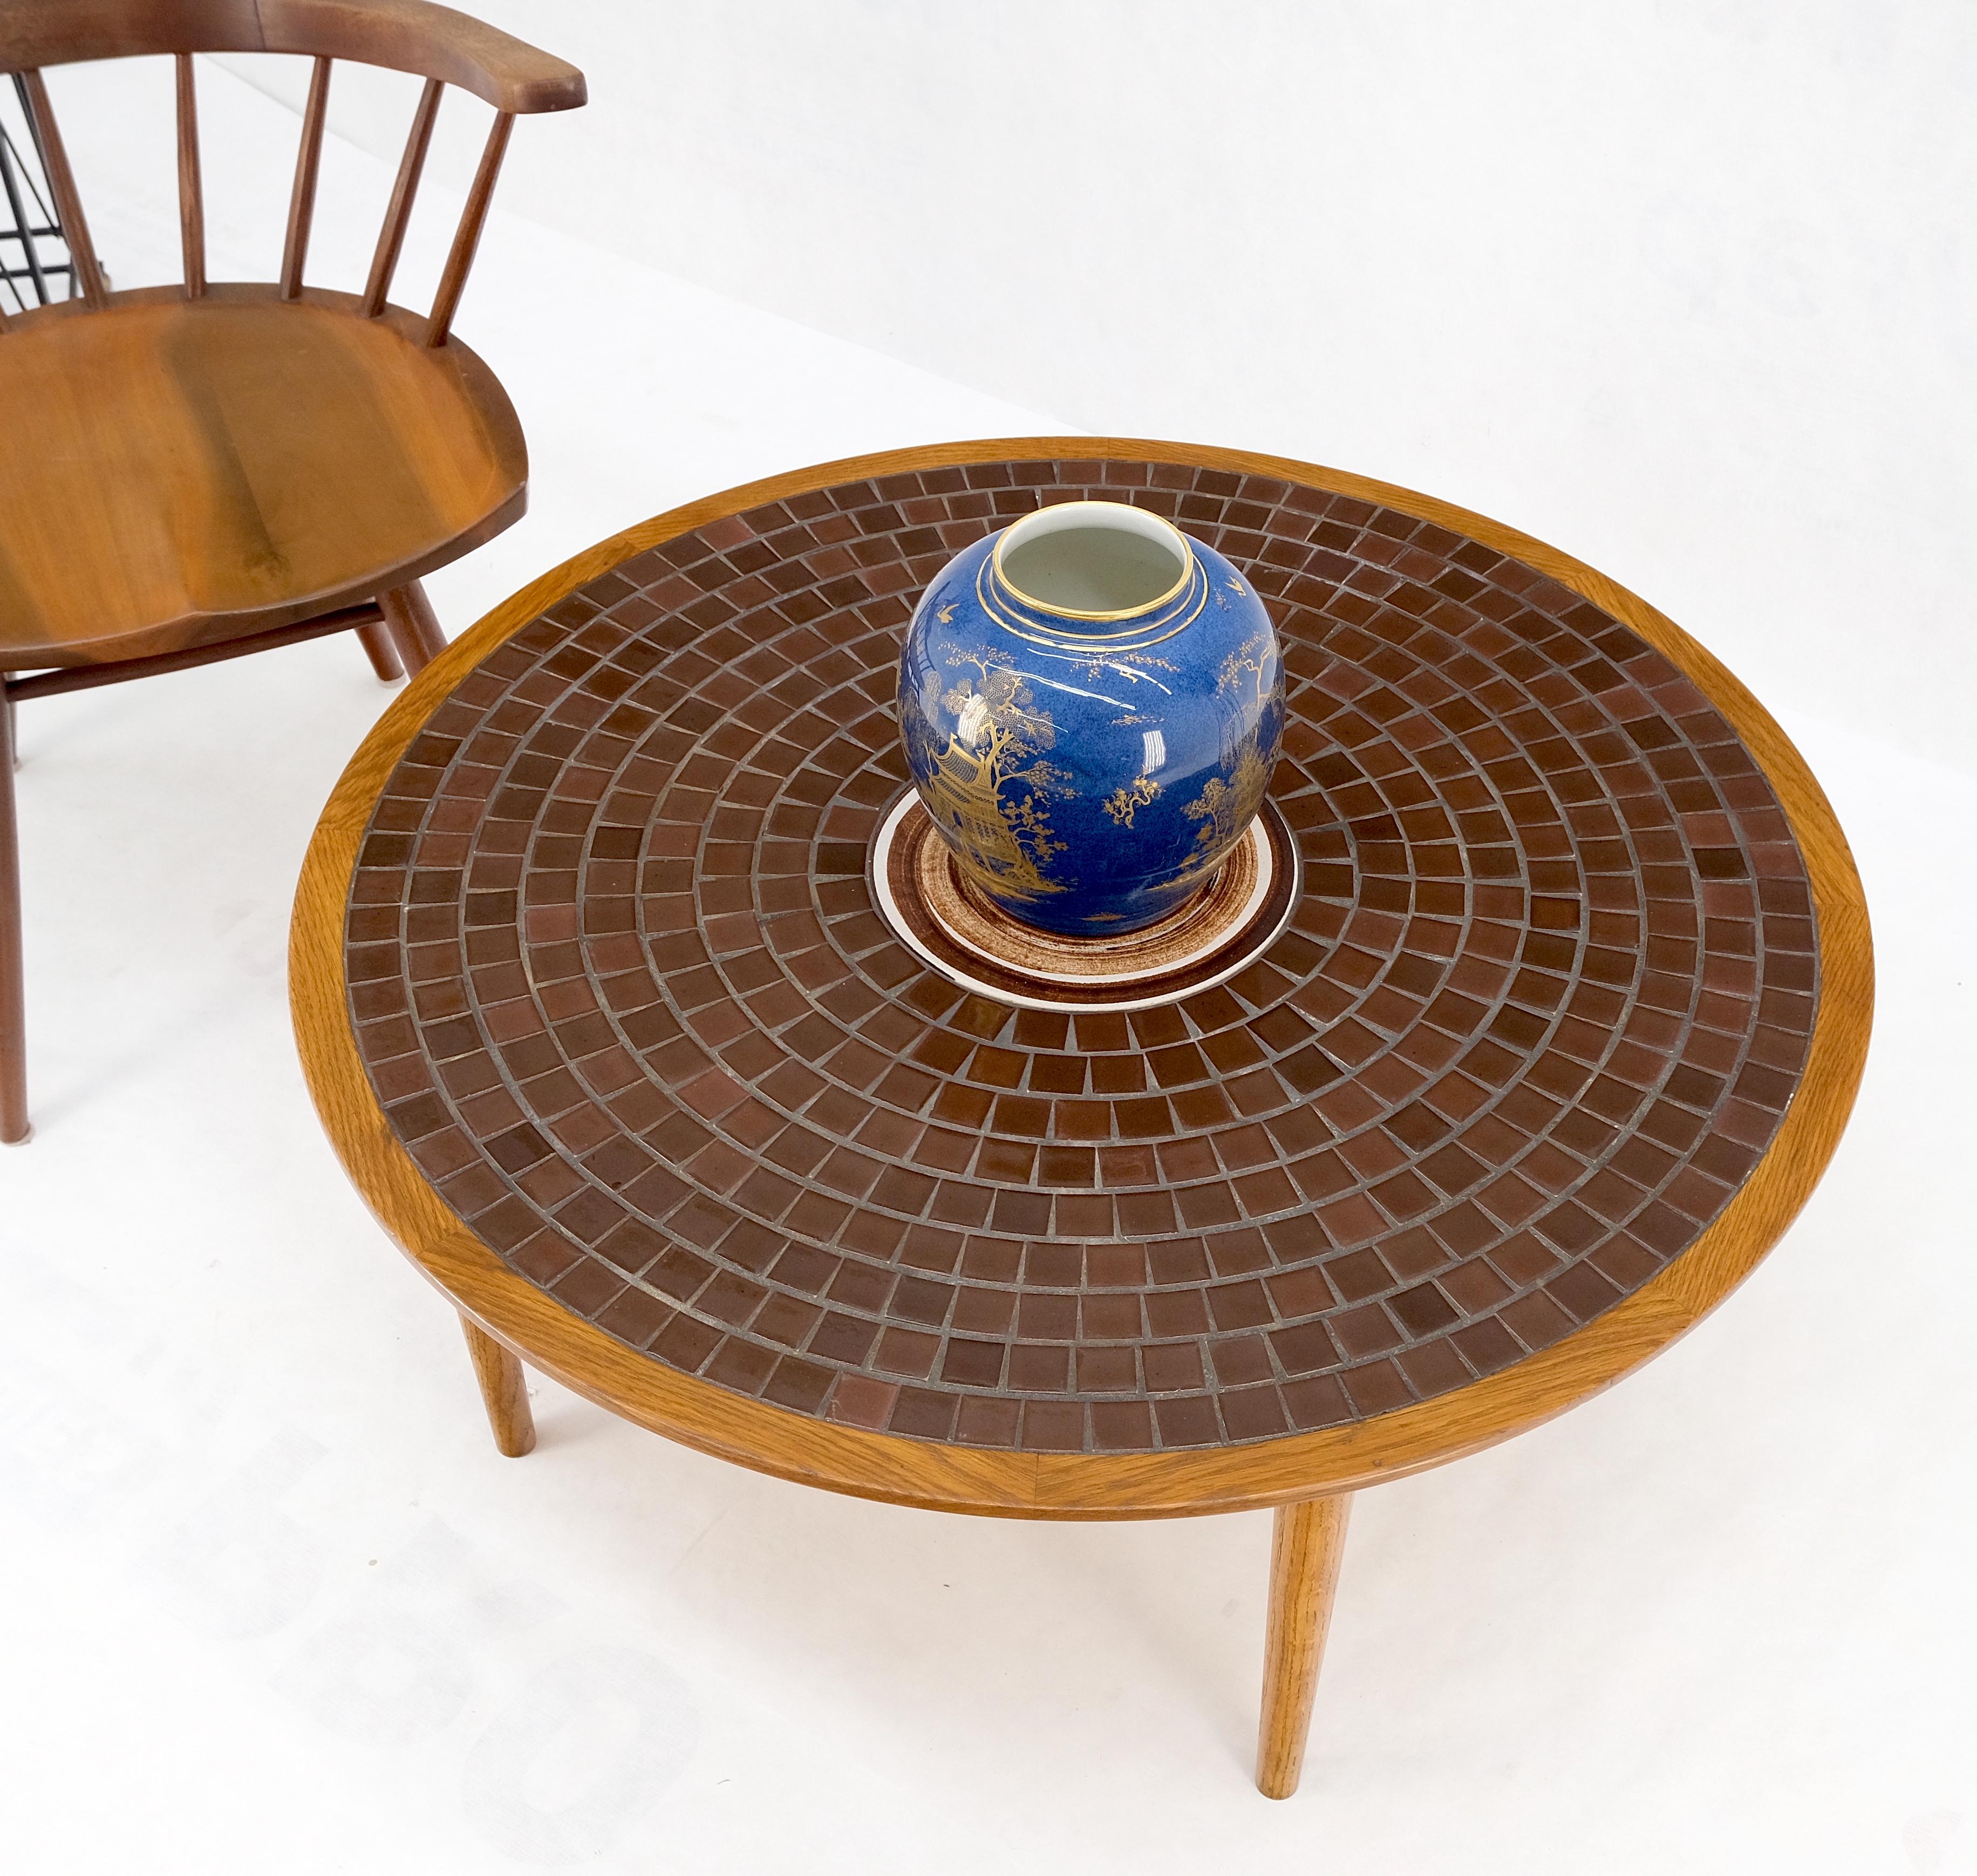 American Gordon Martz Tile Mosaic Round Top Coffee Table on Tapered Dowel Legs MINT! For Sale